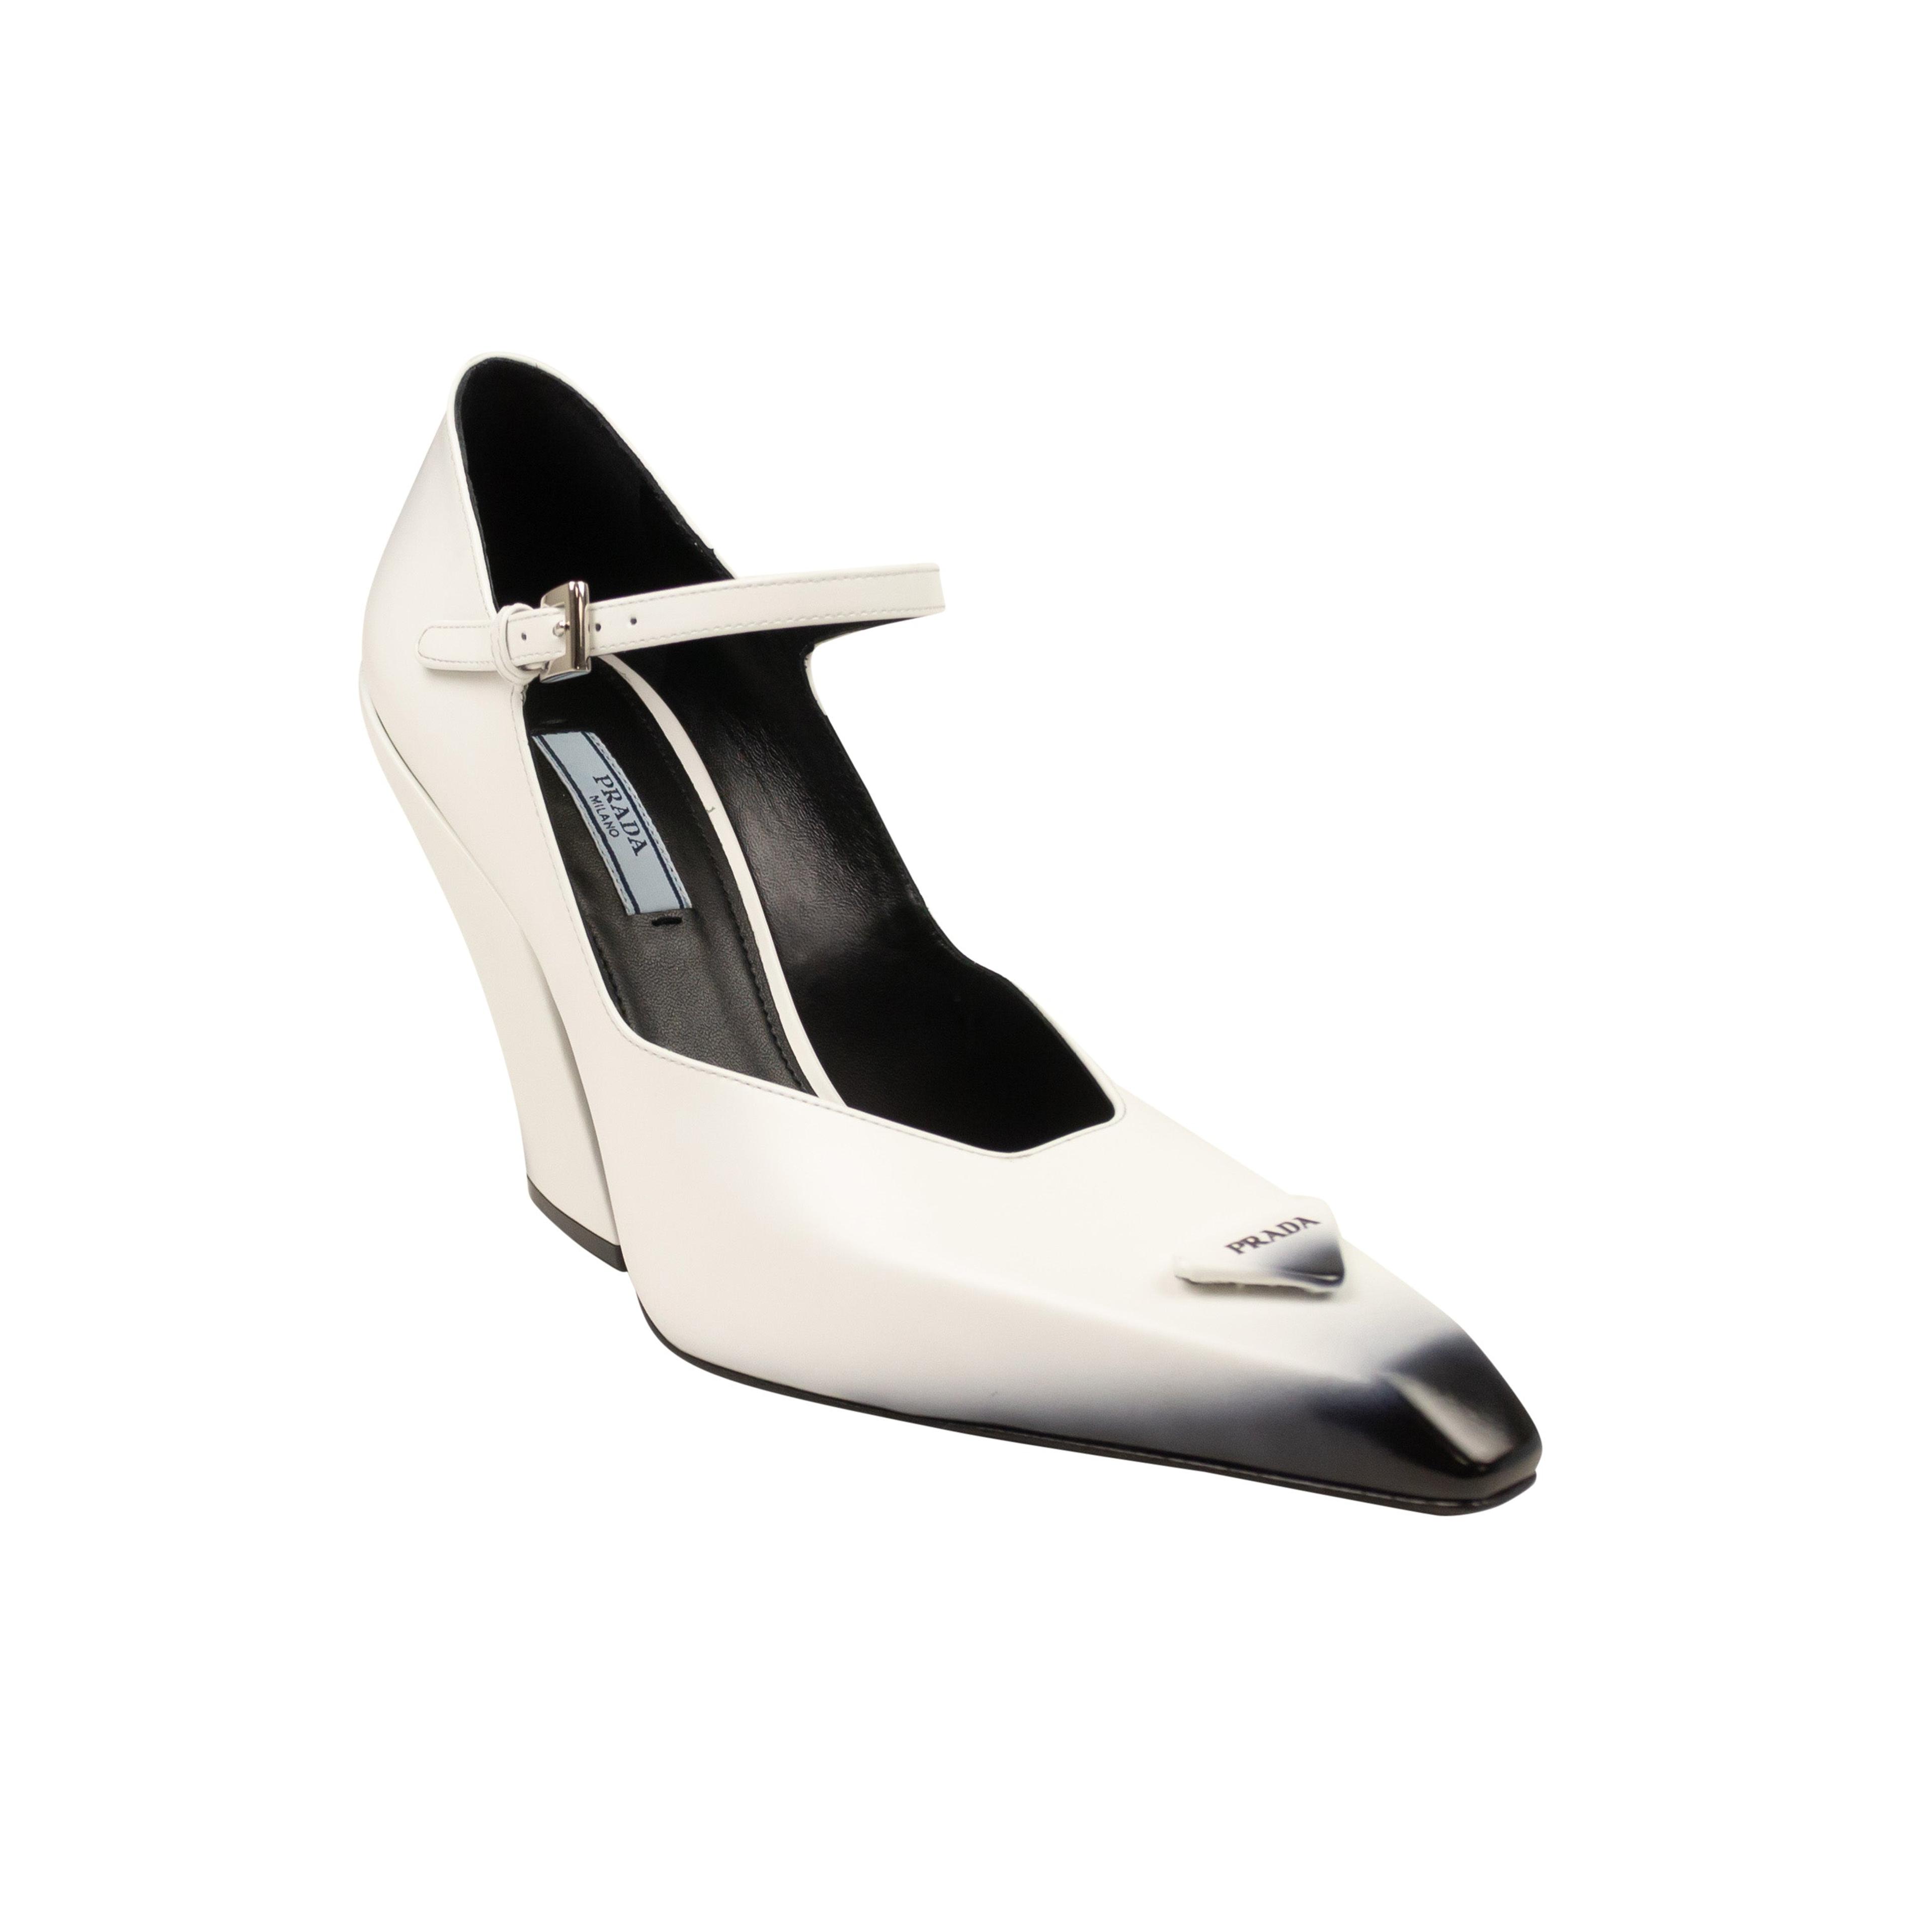 Alternate View 1 of White Brushed Leather Pointed Toe Pumps